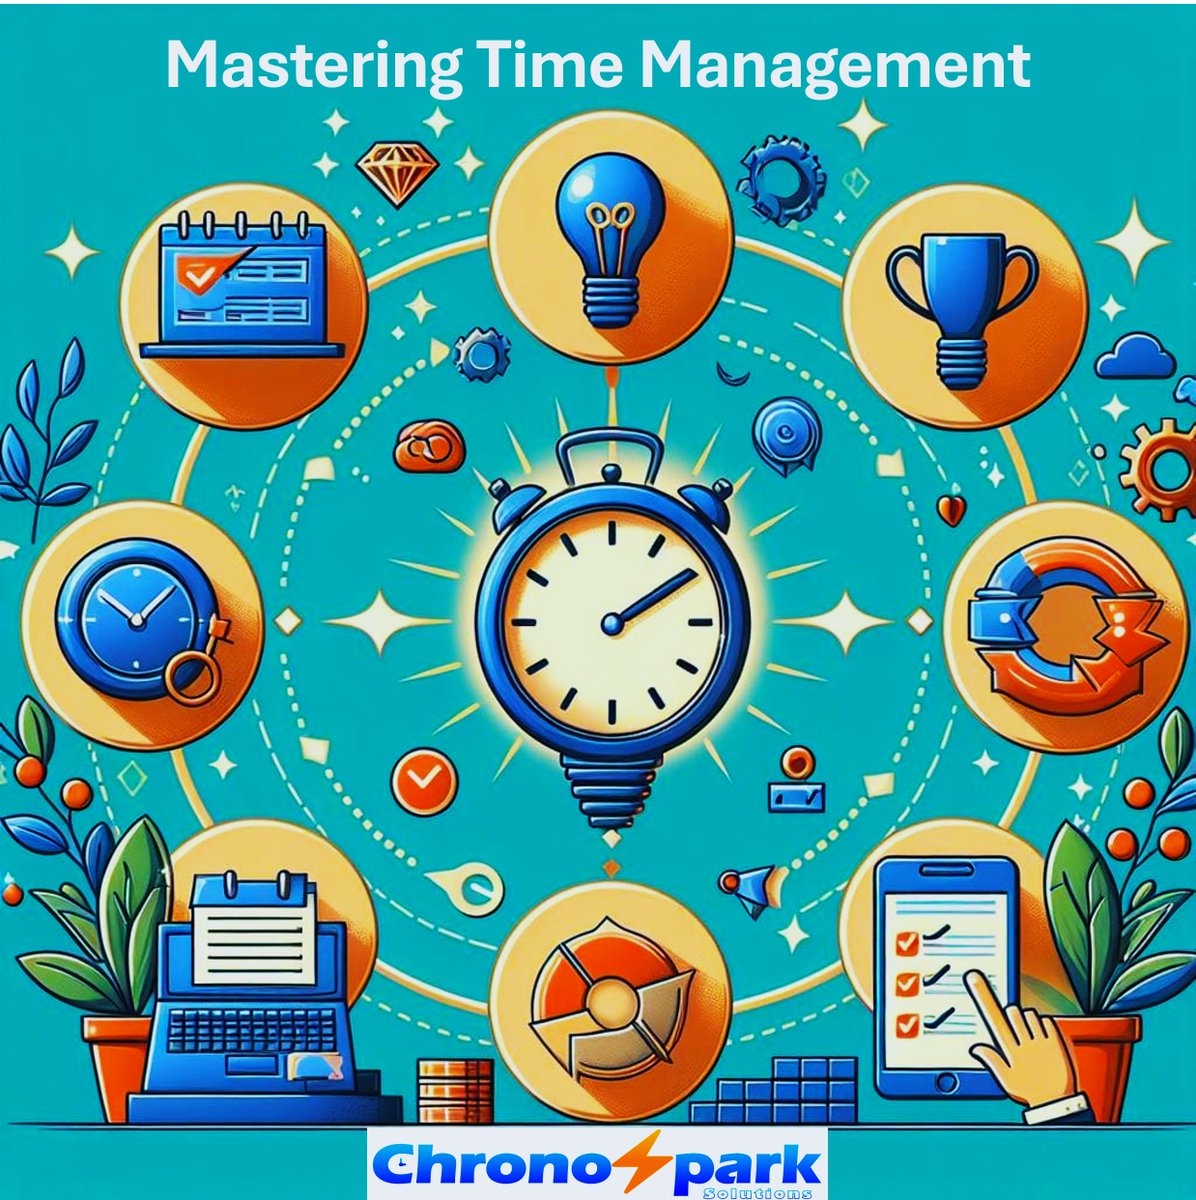 ⏰📝 Mastering Time Management: A Five-Step Guide 📝⏰

🌟 Efficiency is Key: Completing Tasks on Time #TimeManagement #Productivity #Efficiency #TaskCompletion